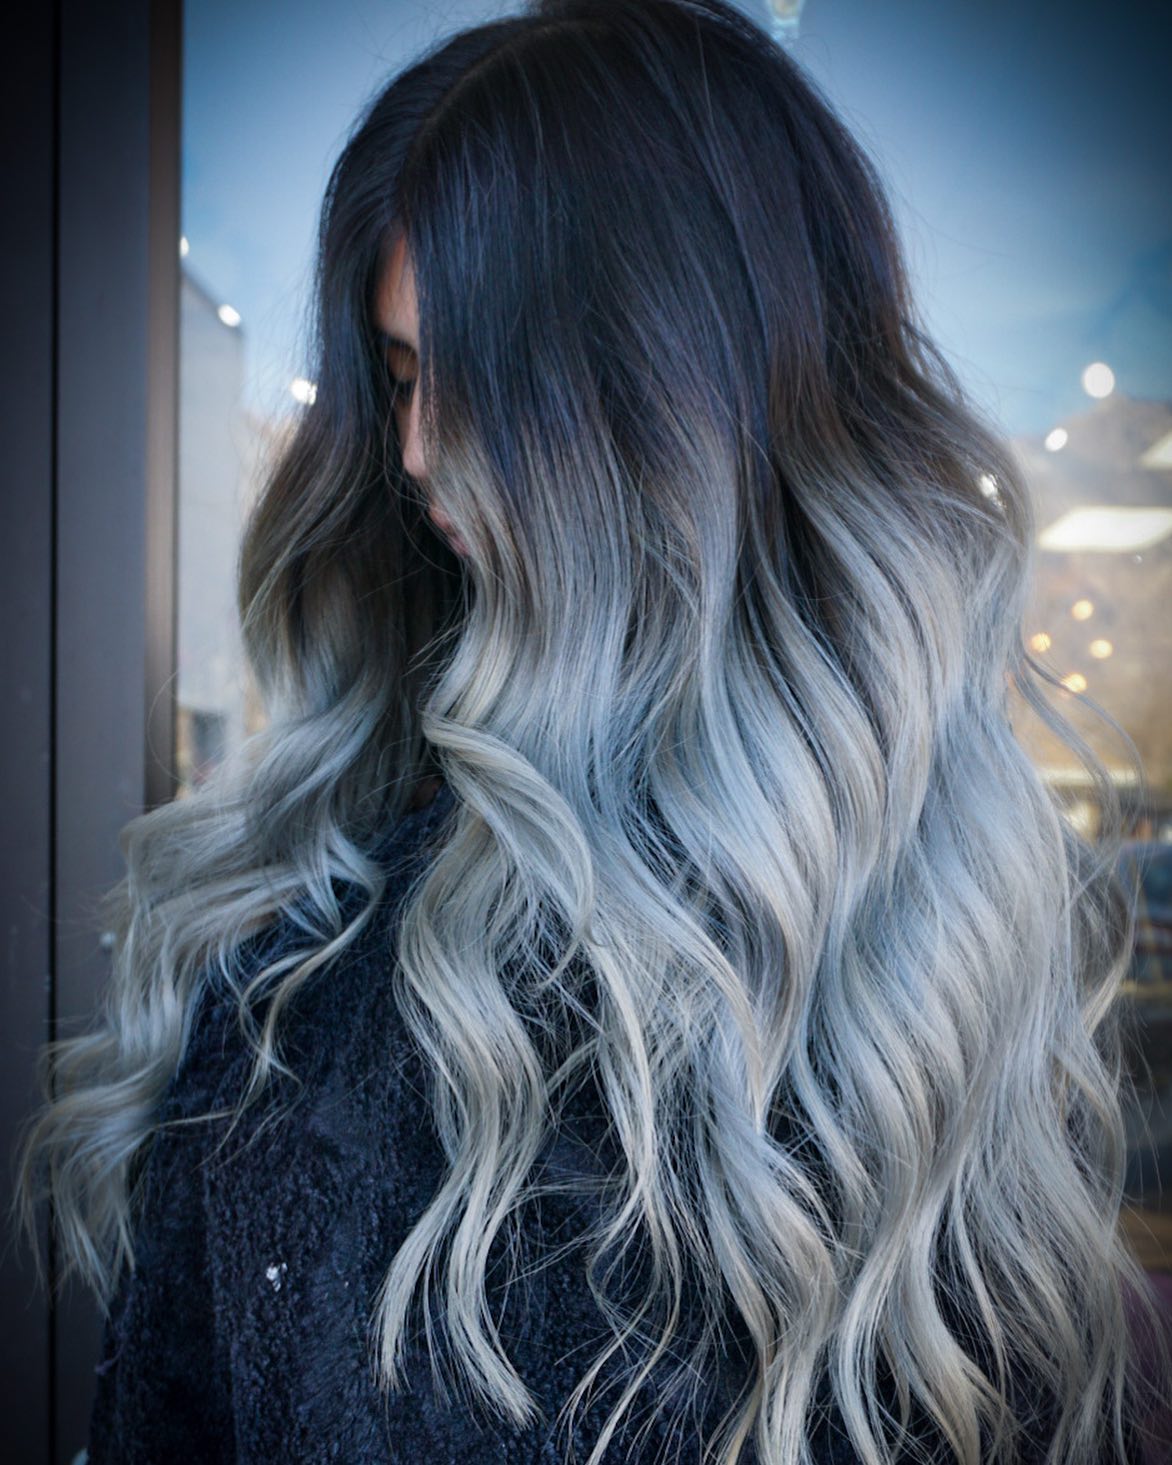 Long Wavy Smokey Gray Ombre Hair Color with Black Roots